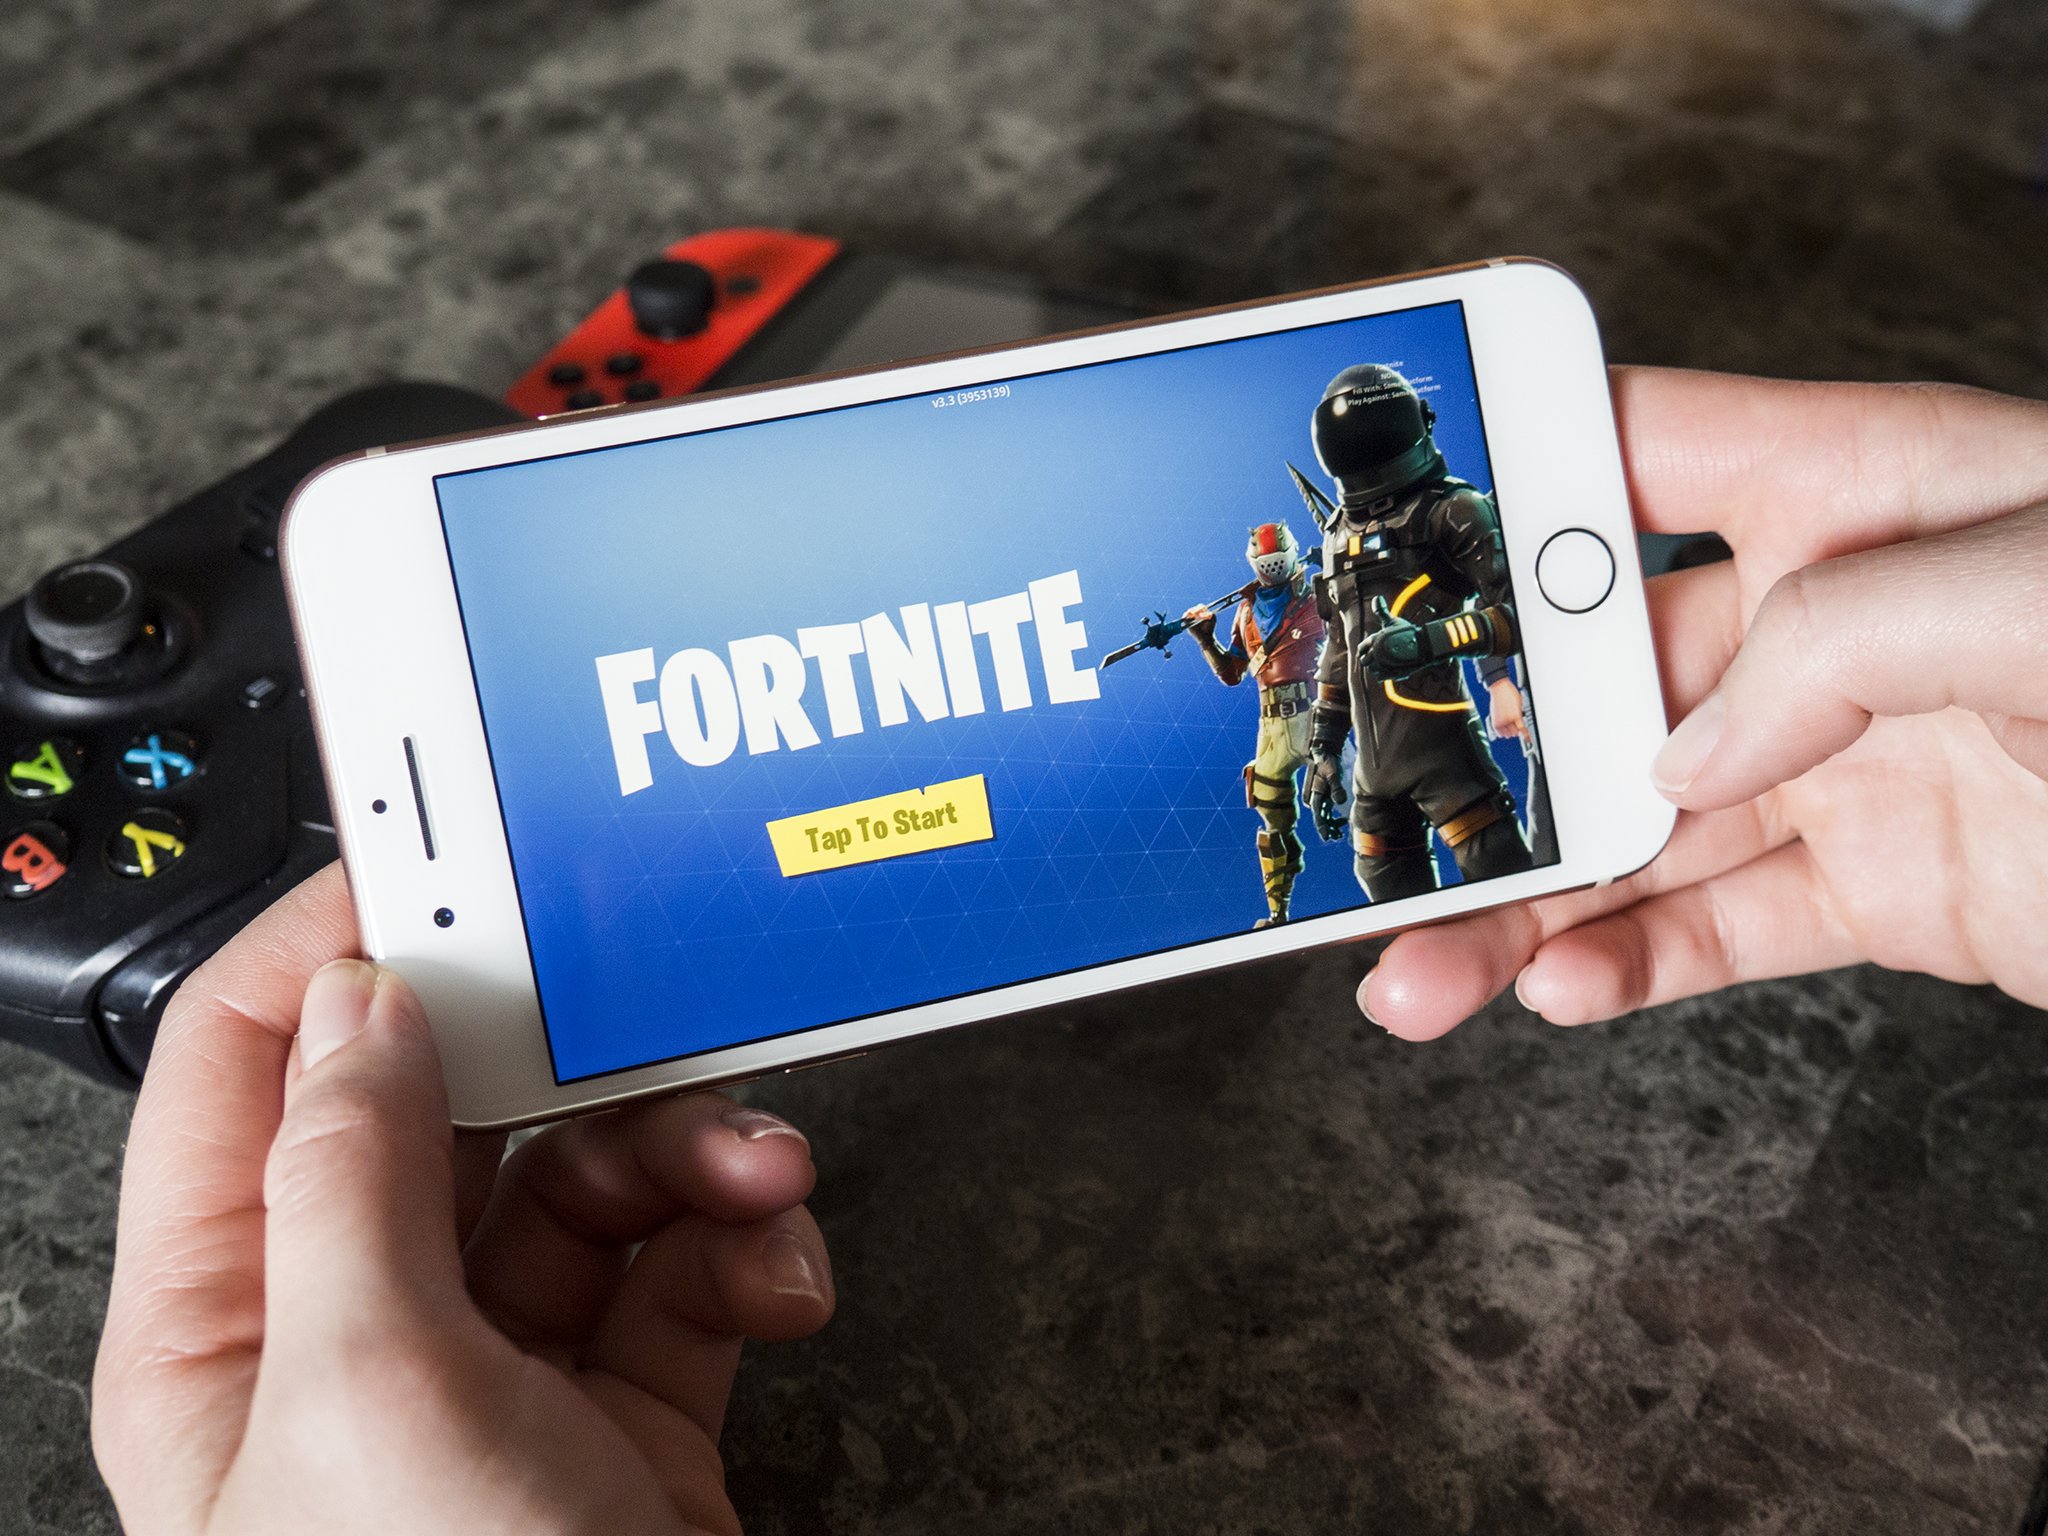 Xbox taps into cloud gaming, makes 'Fortnite' free on iPhones